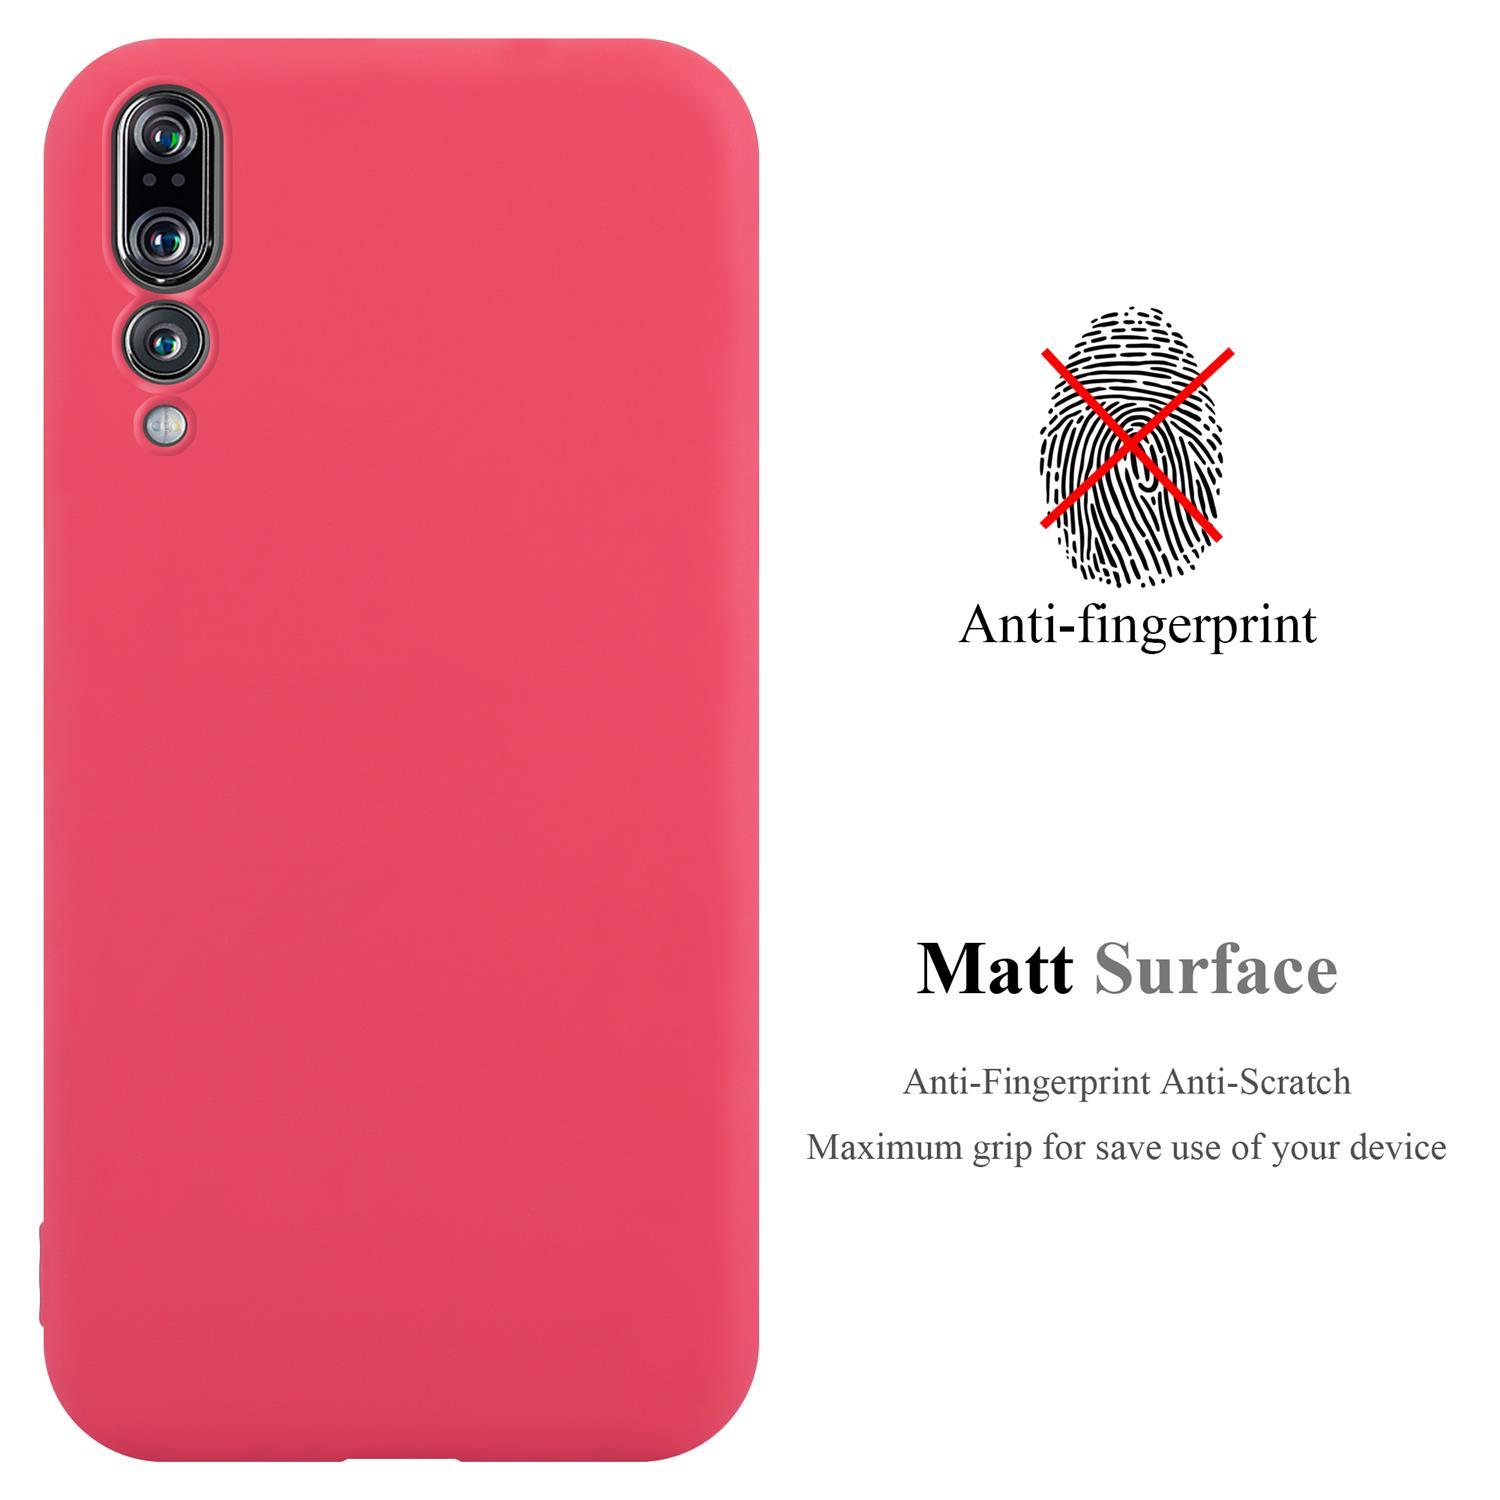 Candy Style, P20 CANDY Backcover, / P20 Hülle ROT Huawei, TPU PLUS, CADORABO im PRO